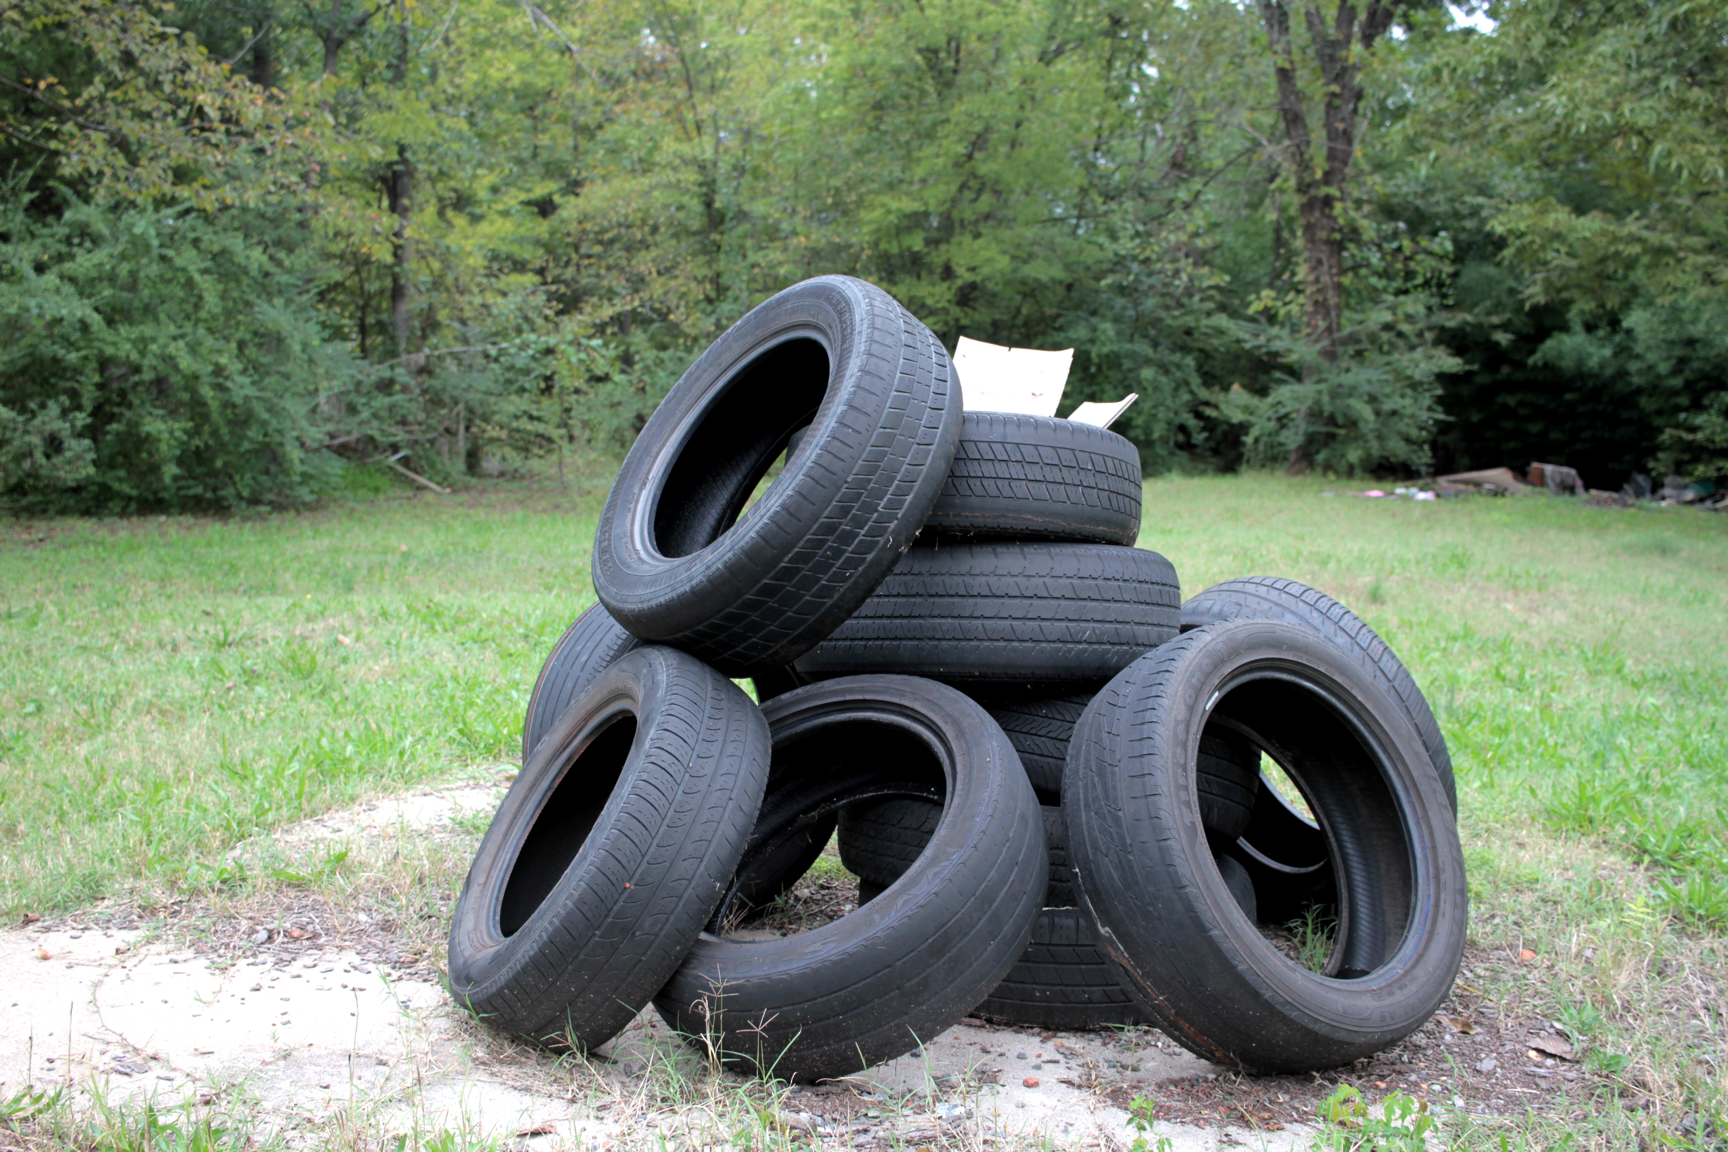  Discarded tires, 2500 block of W. 11th St. 